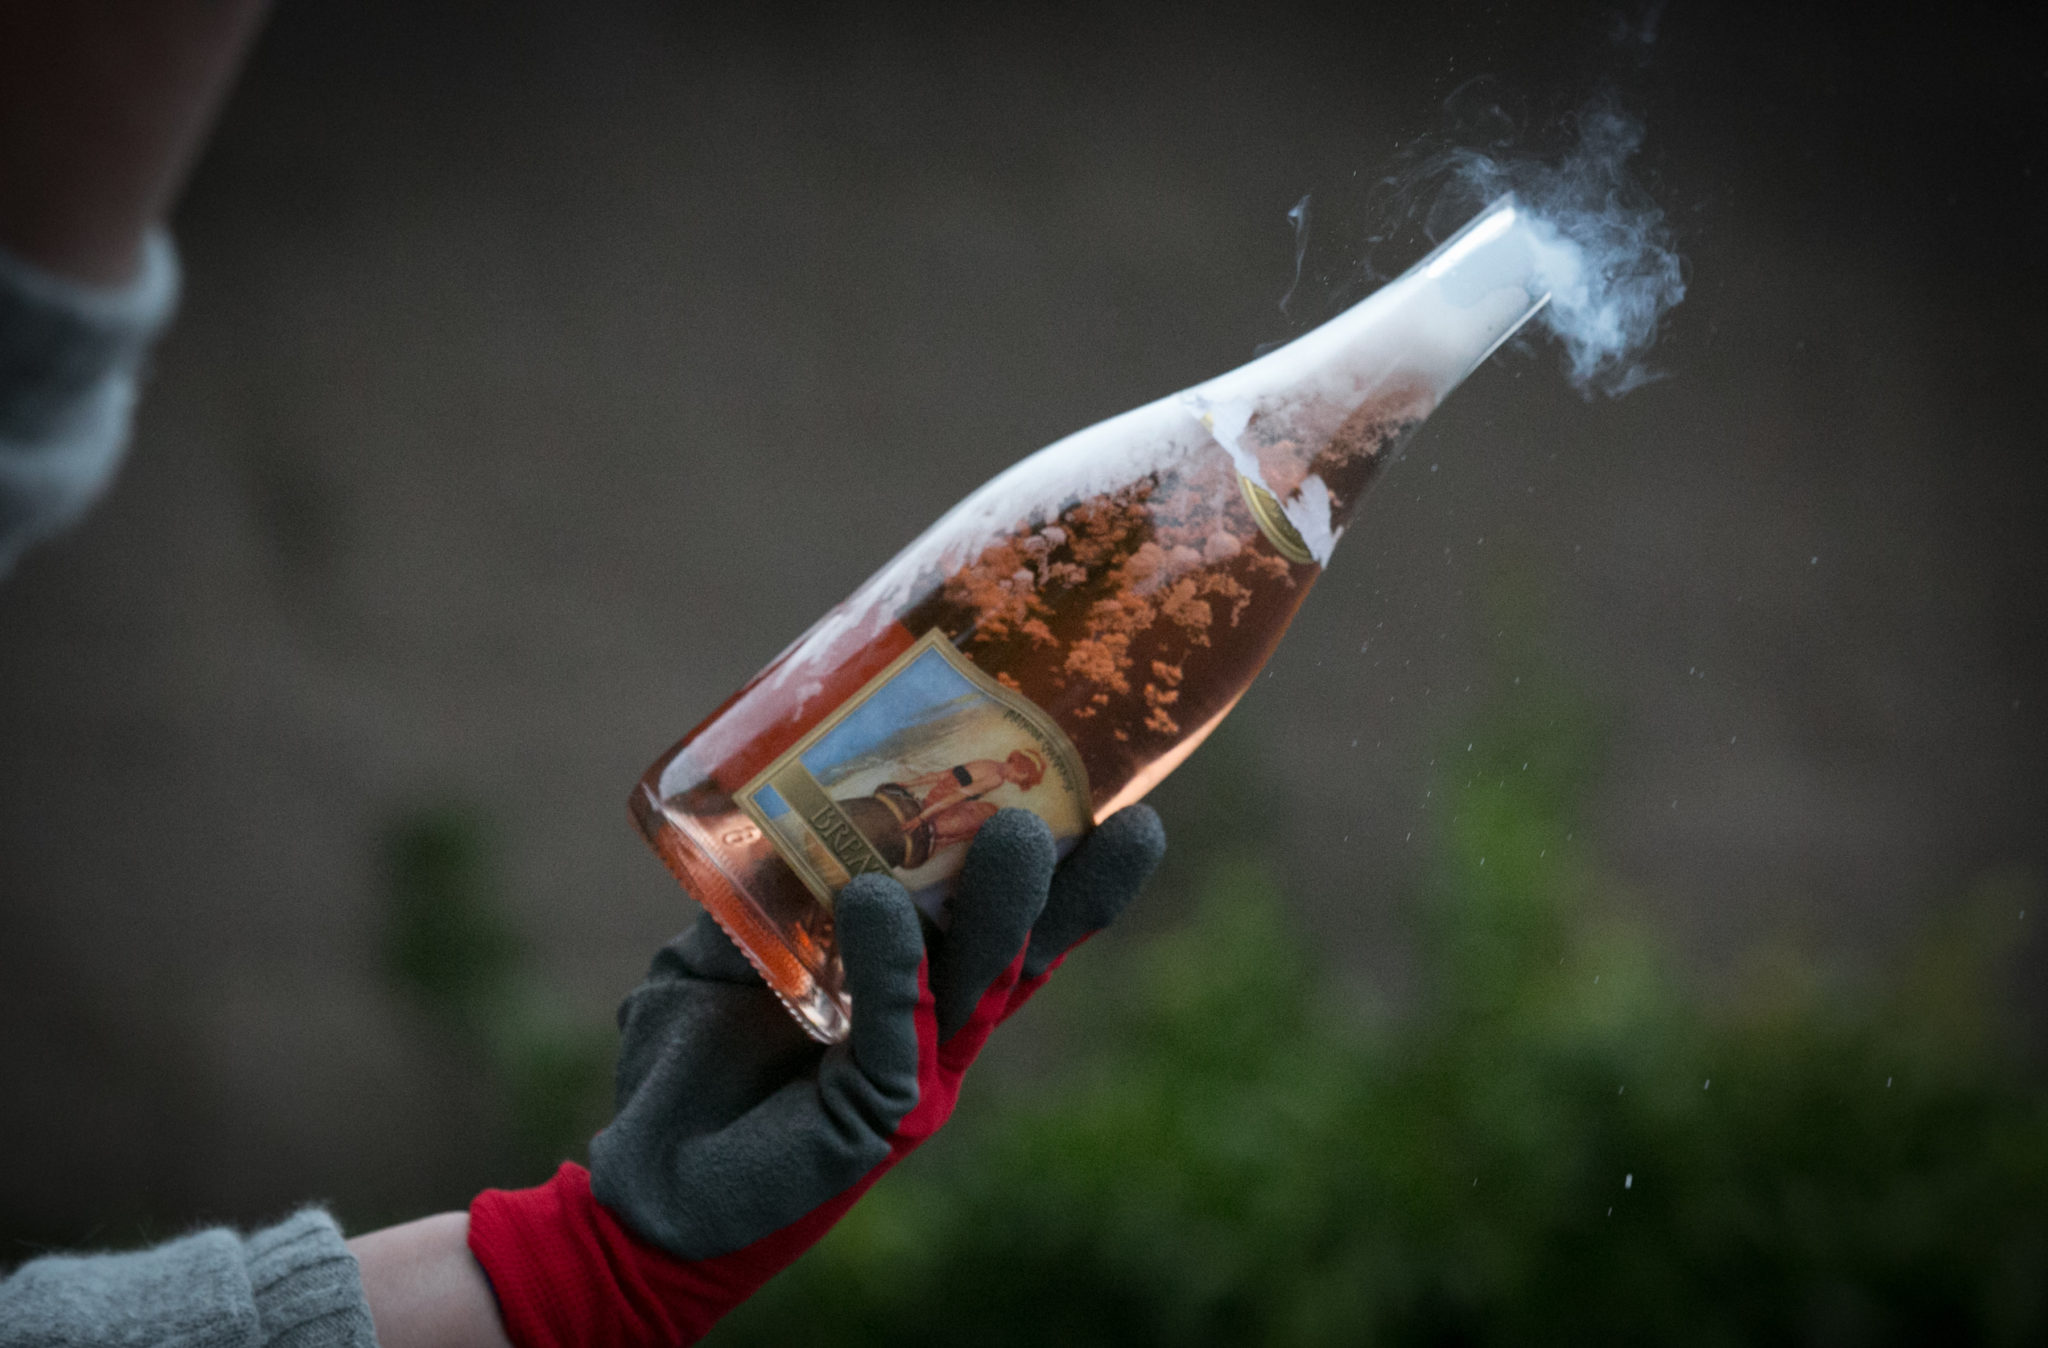 Breathless Wines held its holiday party featuring sabering, the art of lopping off the top of a bottle of bubbly with a sword, in addition to wine and food pairings.